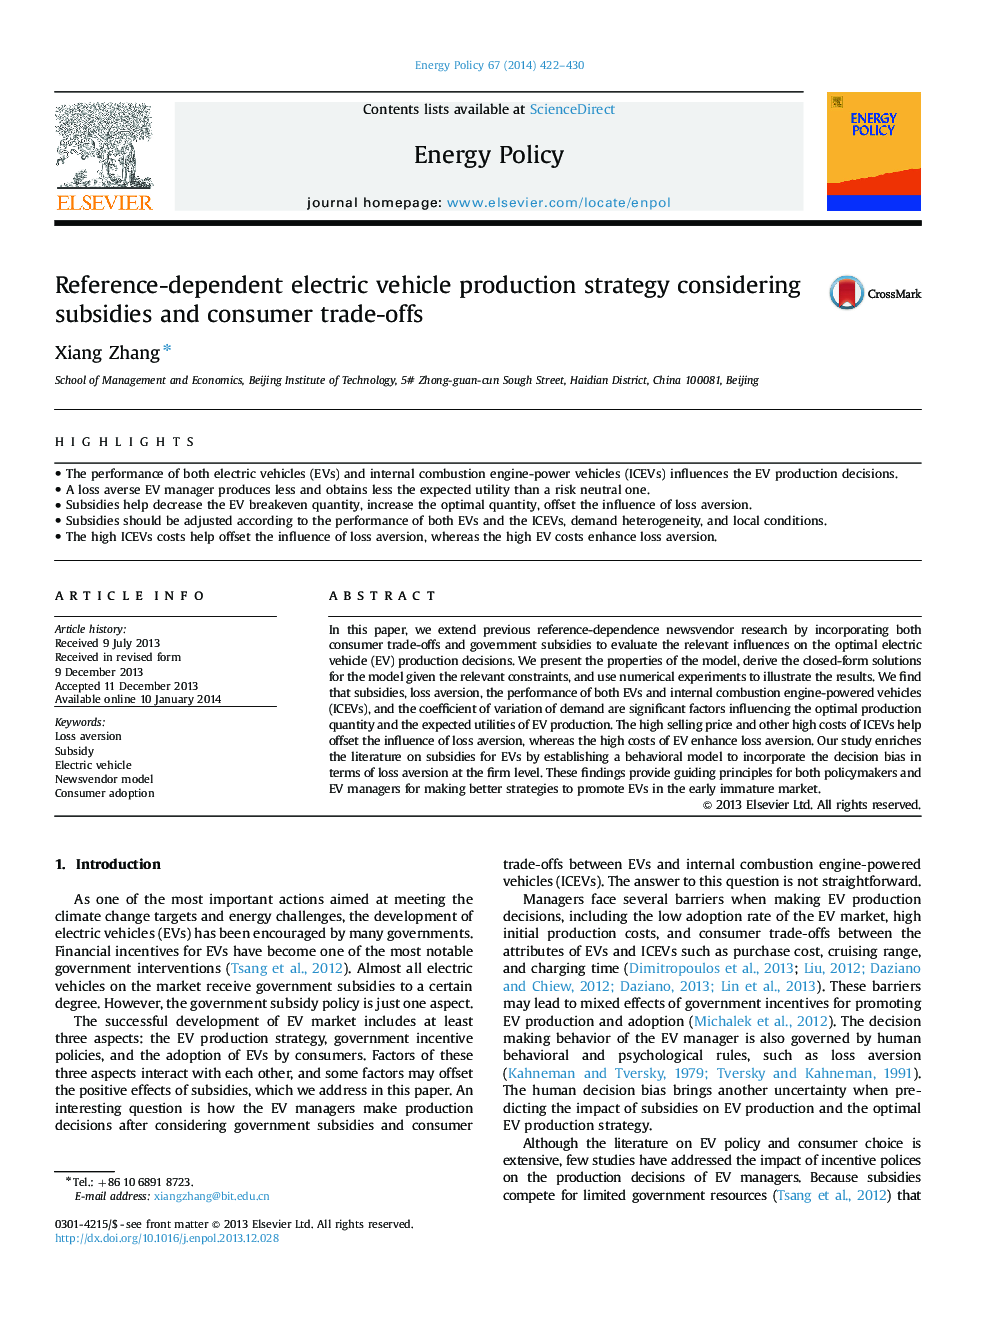 Reference-dependent electric vehicle production strategy considering subsidies and consumer trade-offs